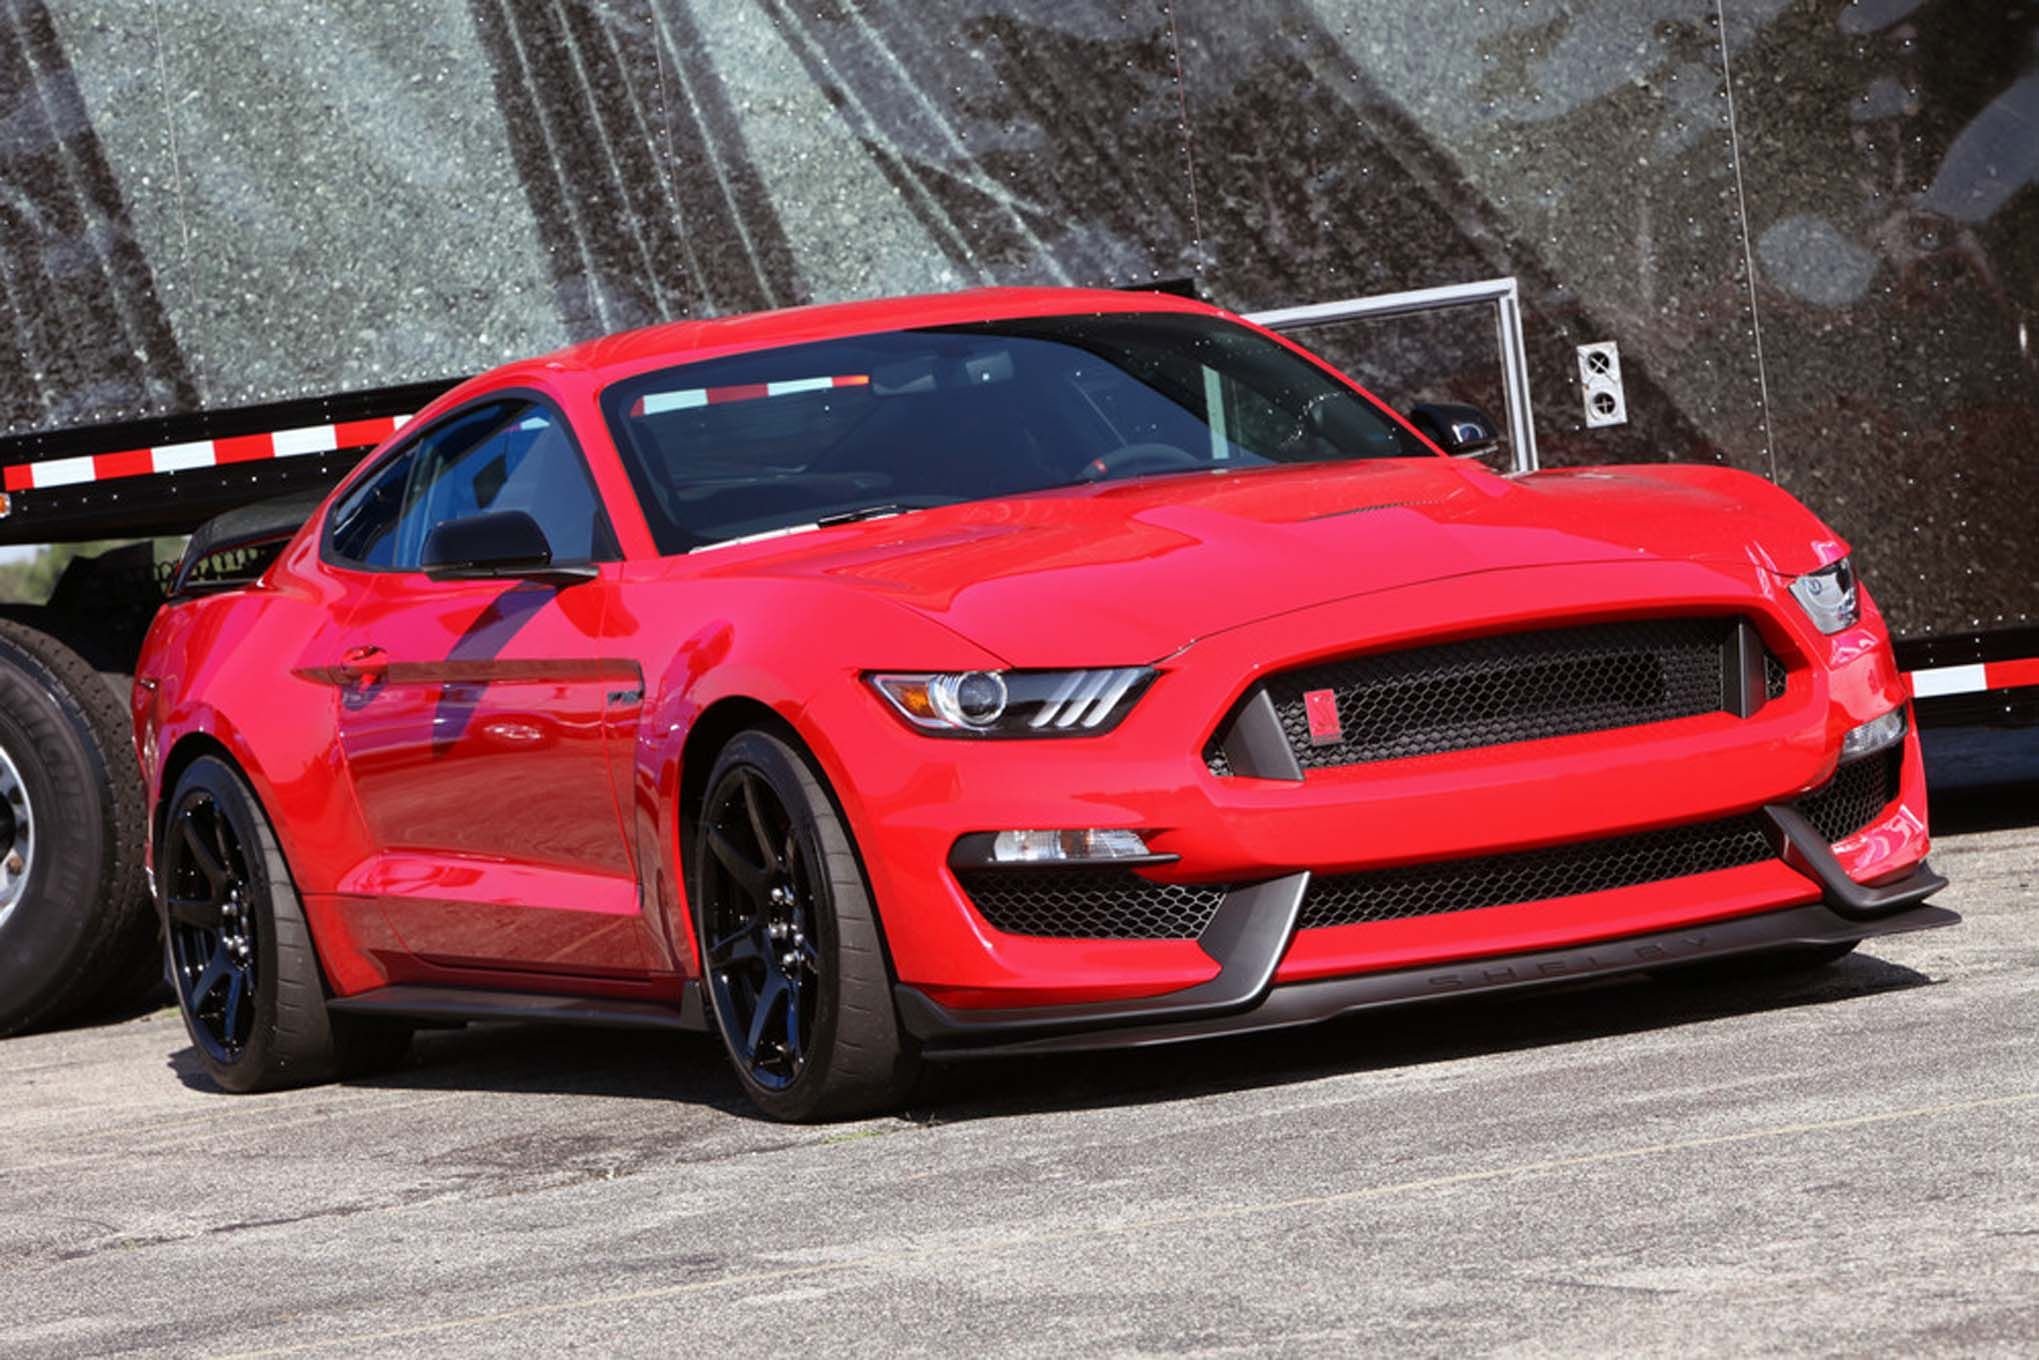 2014, Ford, Mustang, Shelby, Gt350r, Muscle, Supercar, Usa,  03 Wallpaper